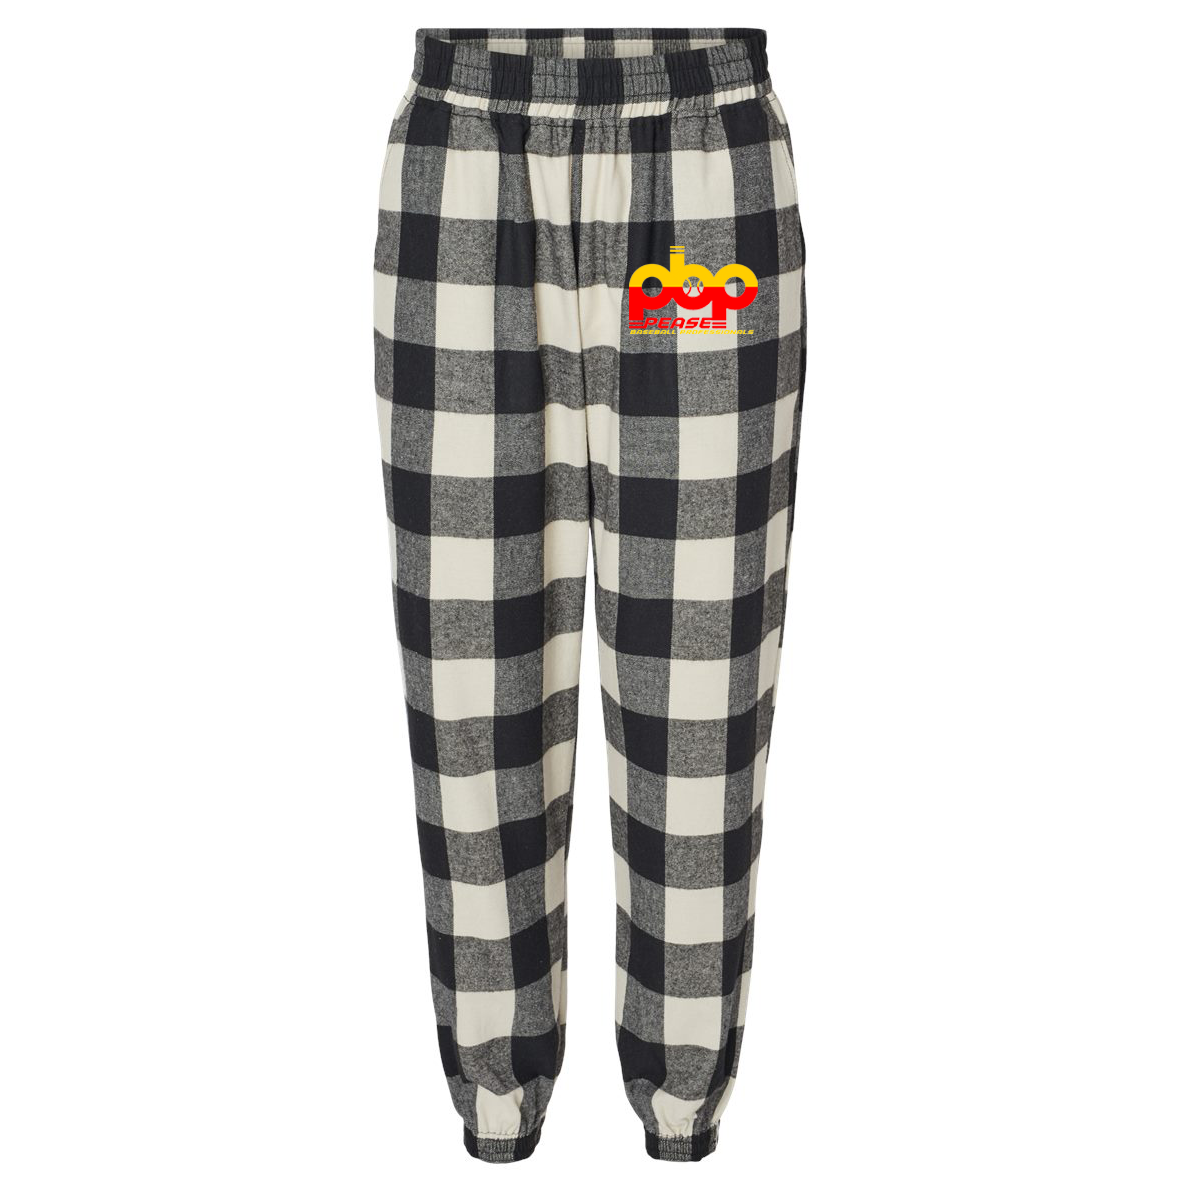 Pease Baseball Professionals Flannel Jogger